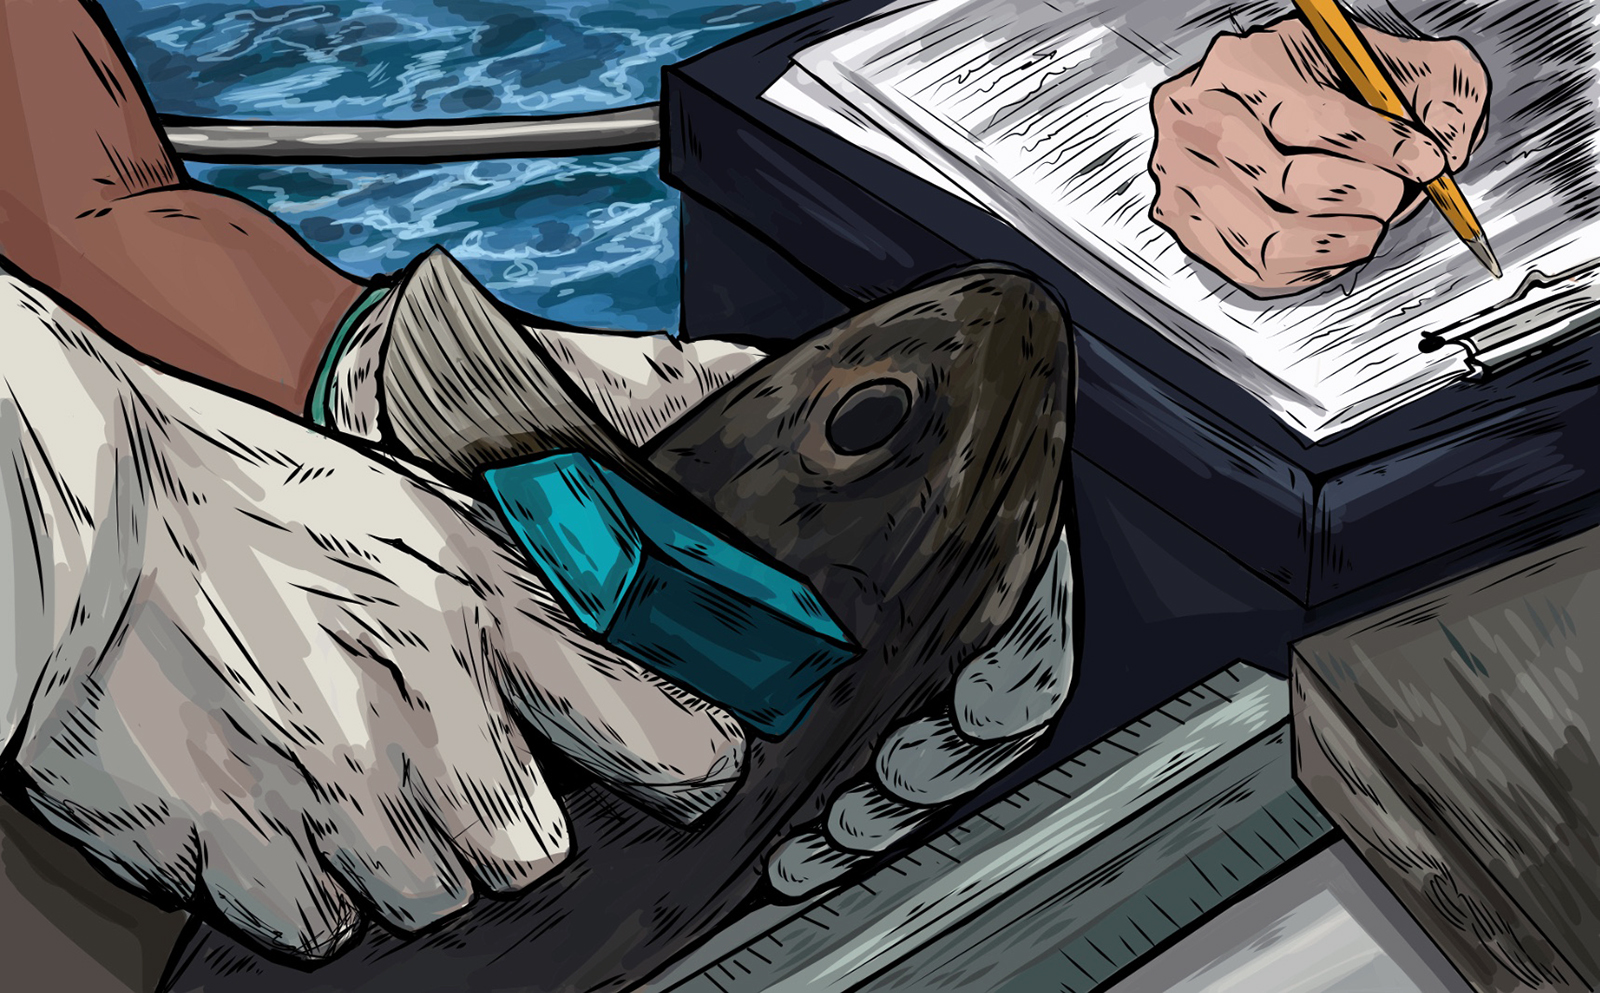 An illustration showing scientists examining and taking data from a rockfish on a boat.